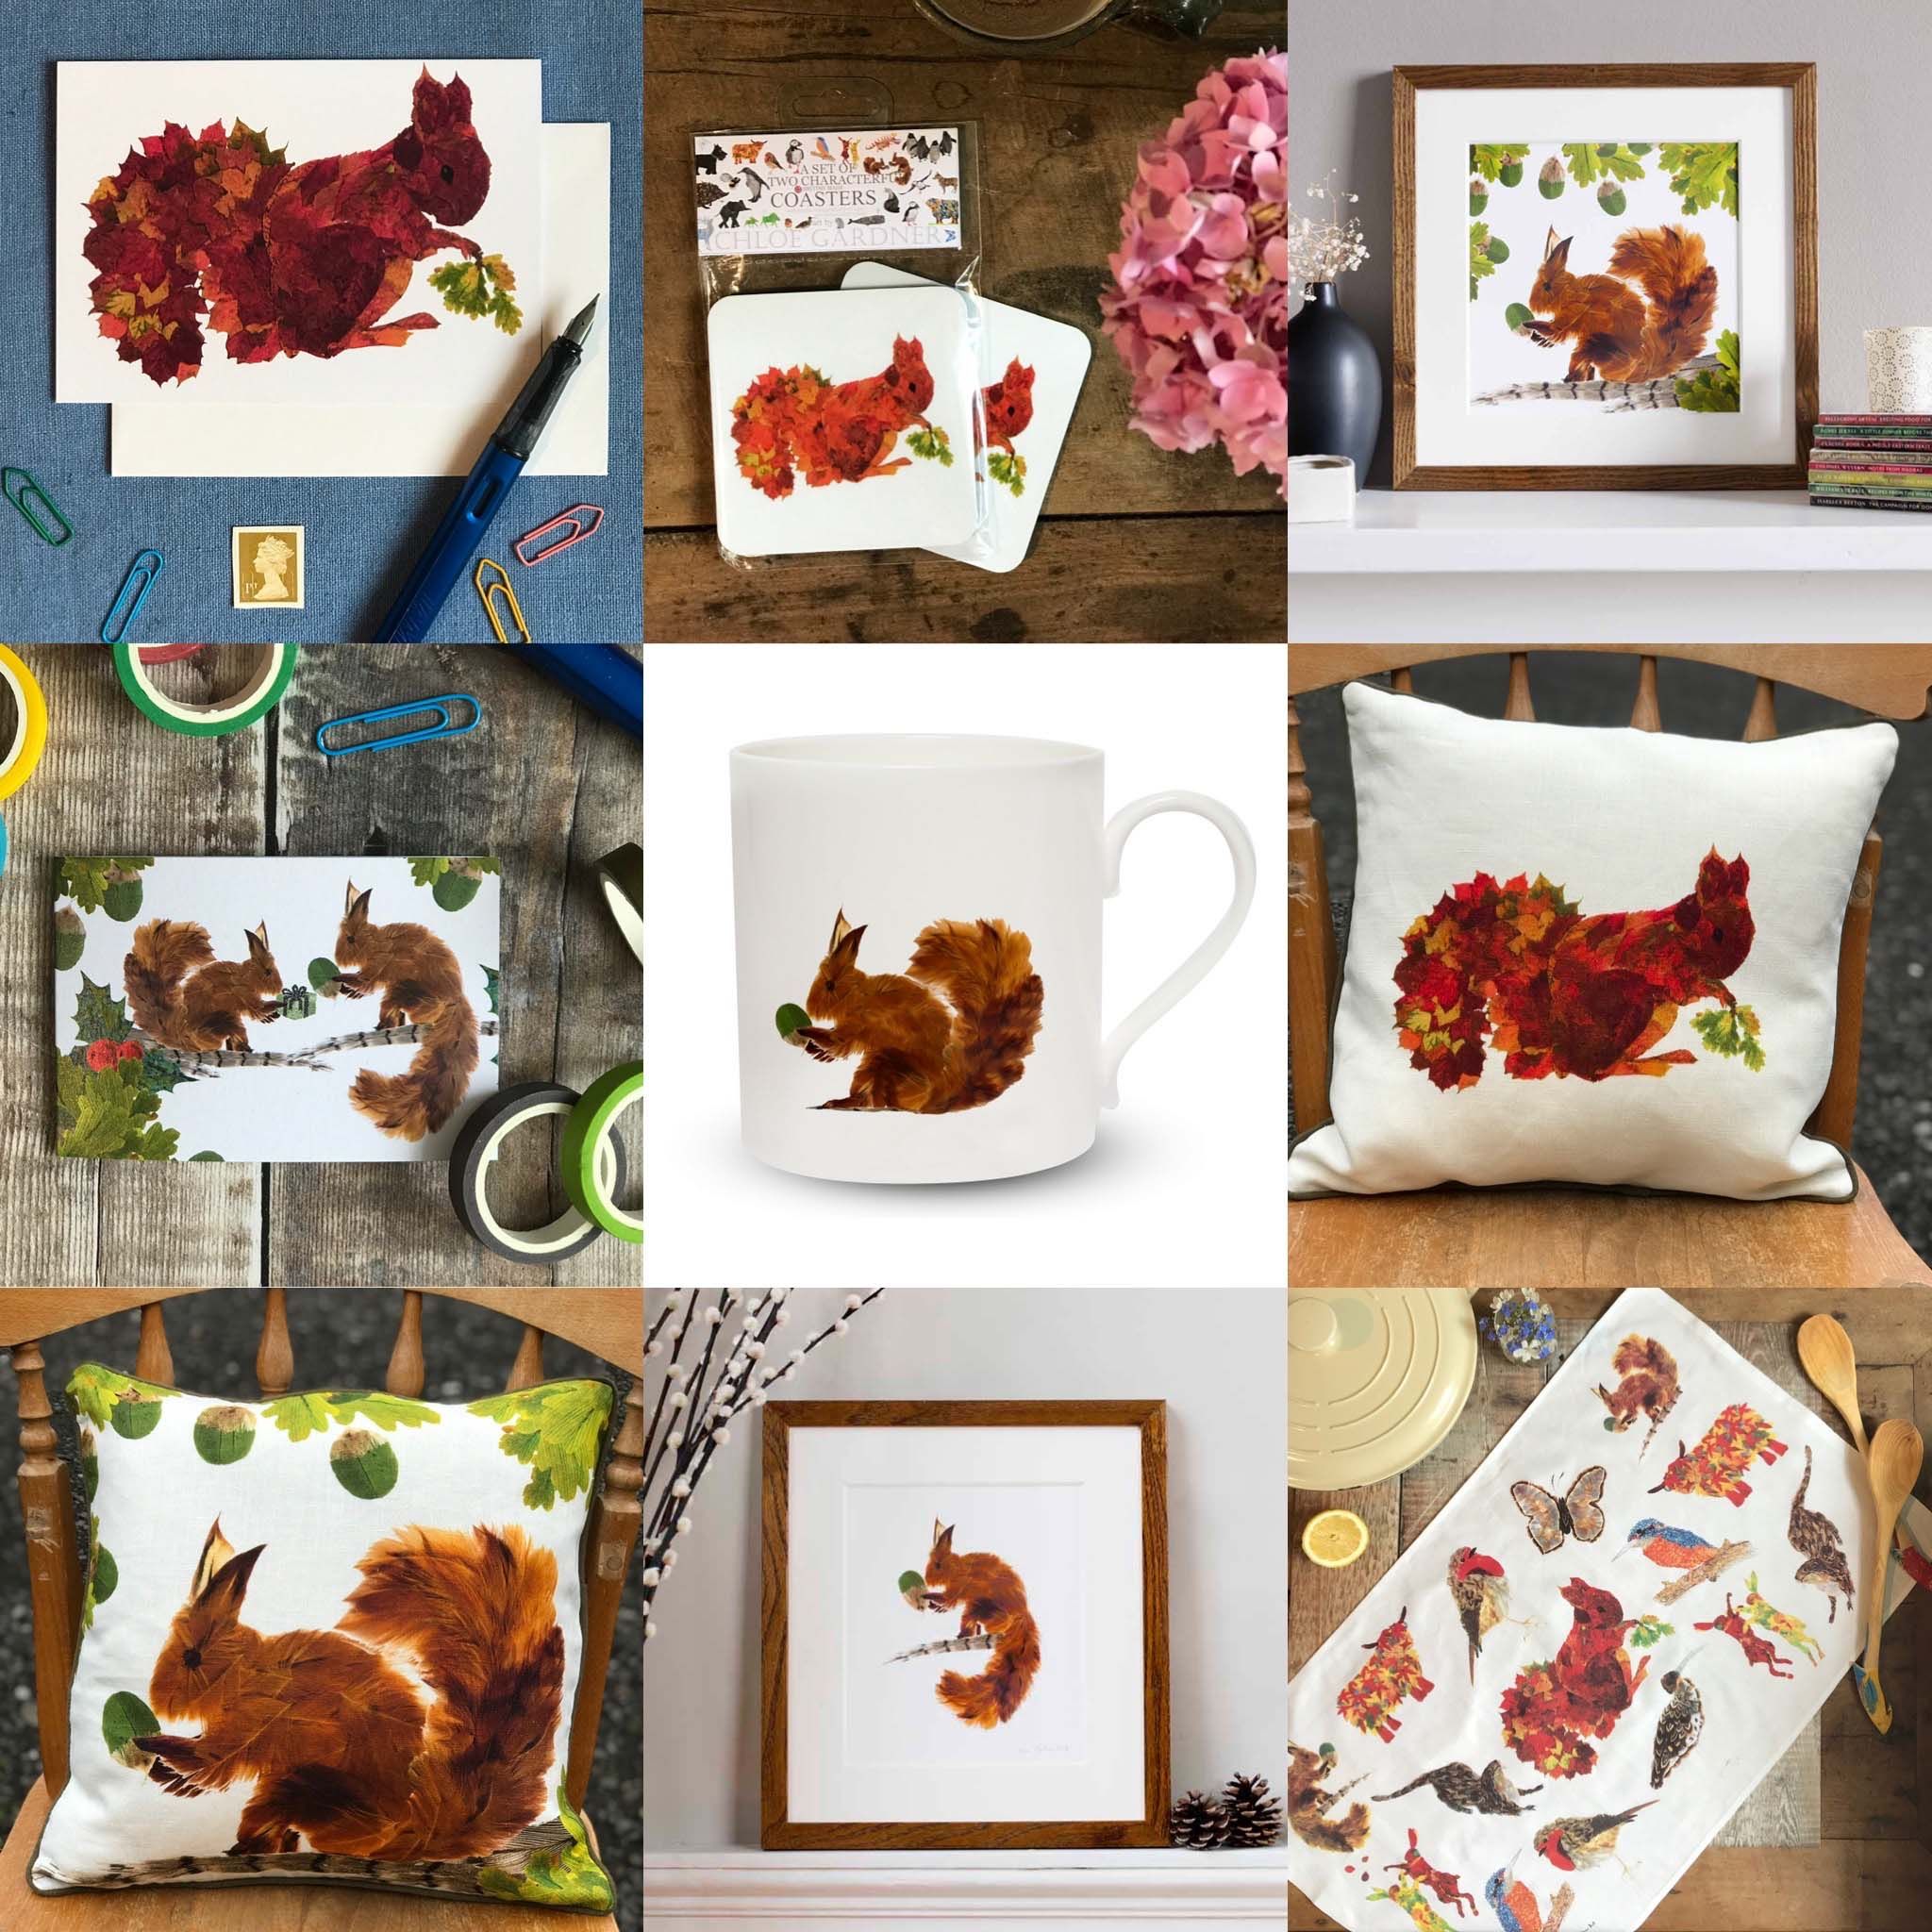 Autumnal products: An autumn leaf cow, squirrels and more..